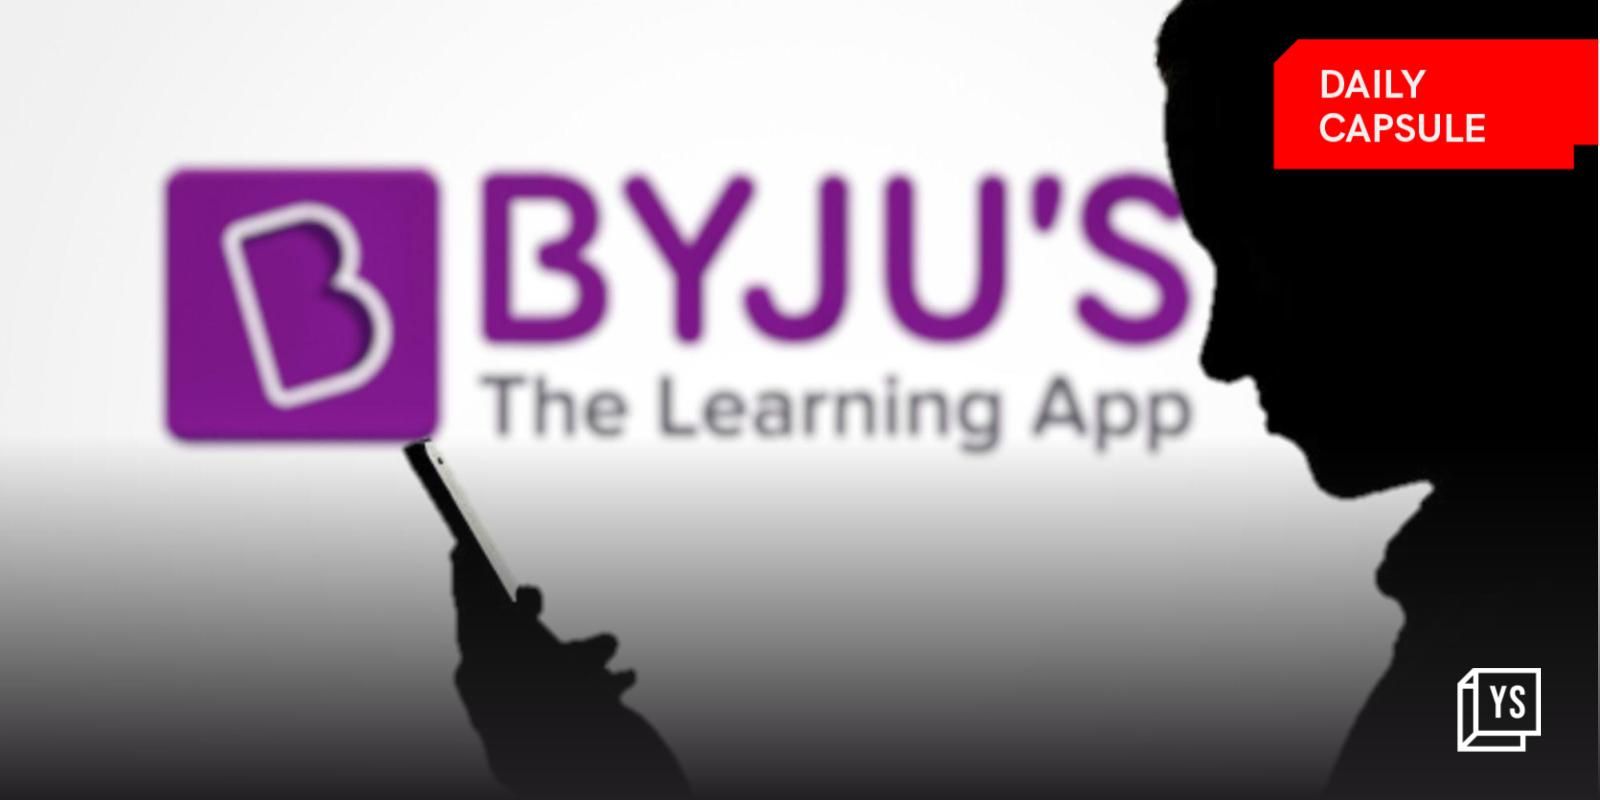 BYJU’S adopts new strategies; Indian retail market to reach $2.2T